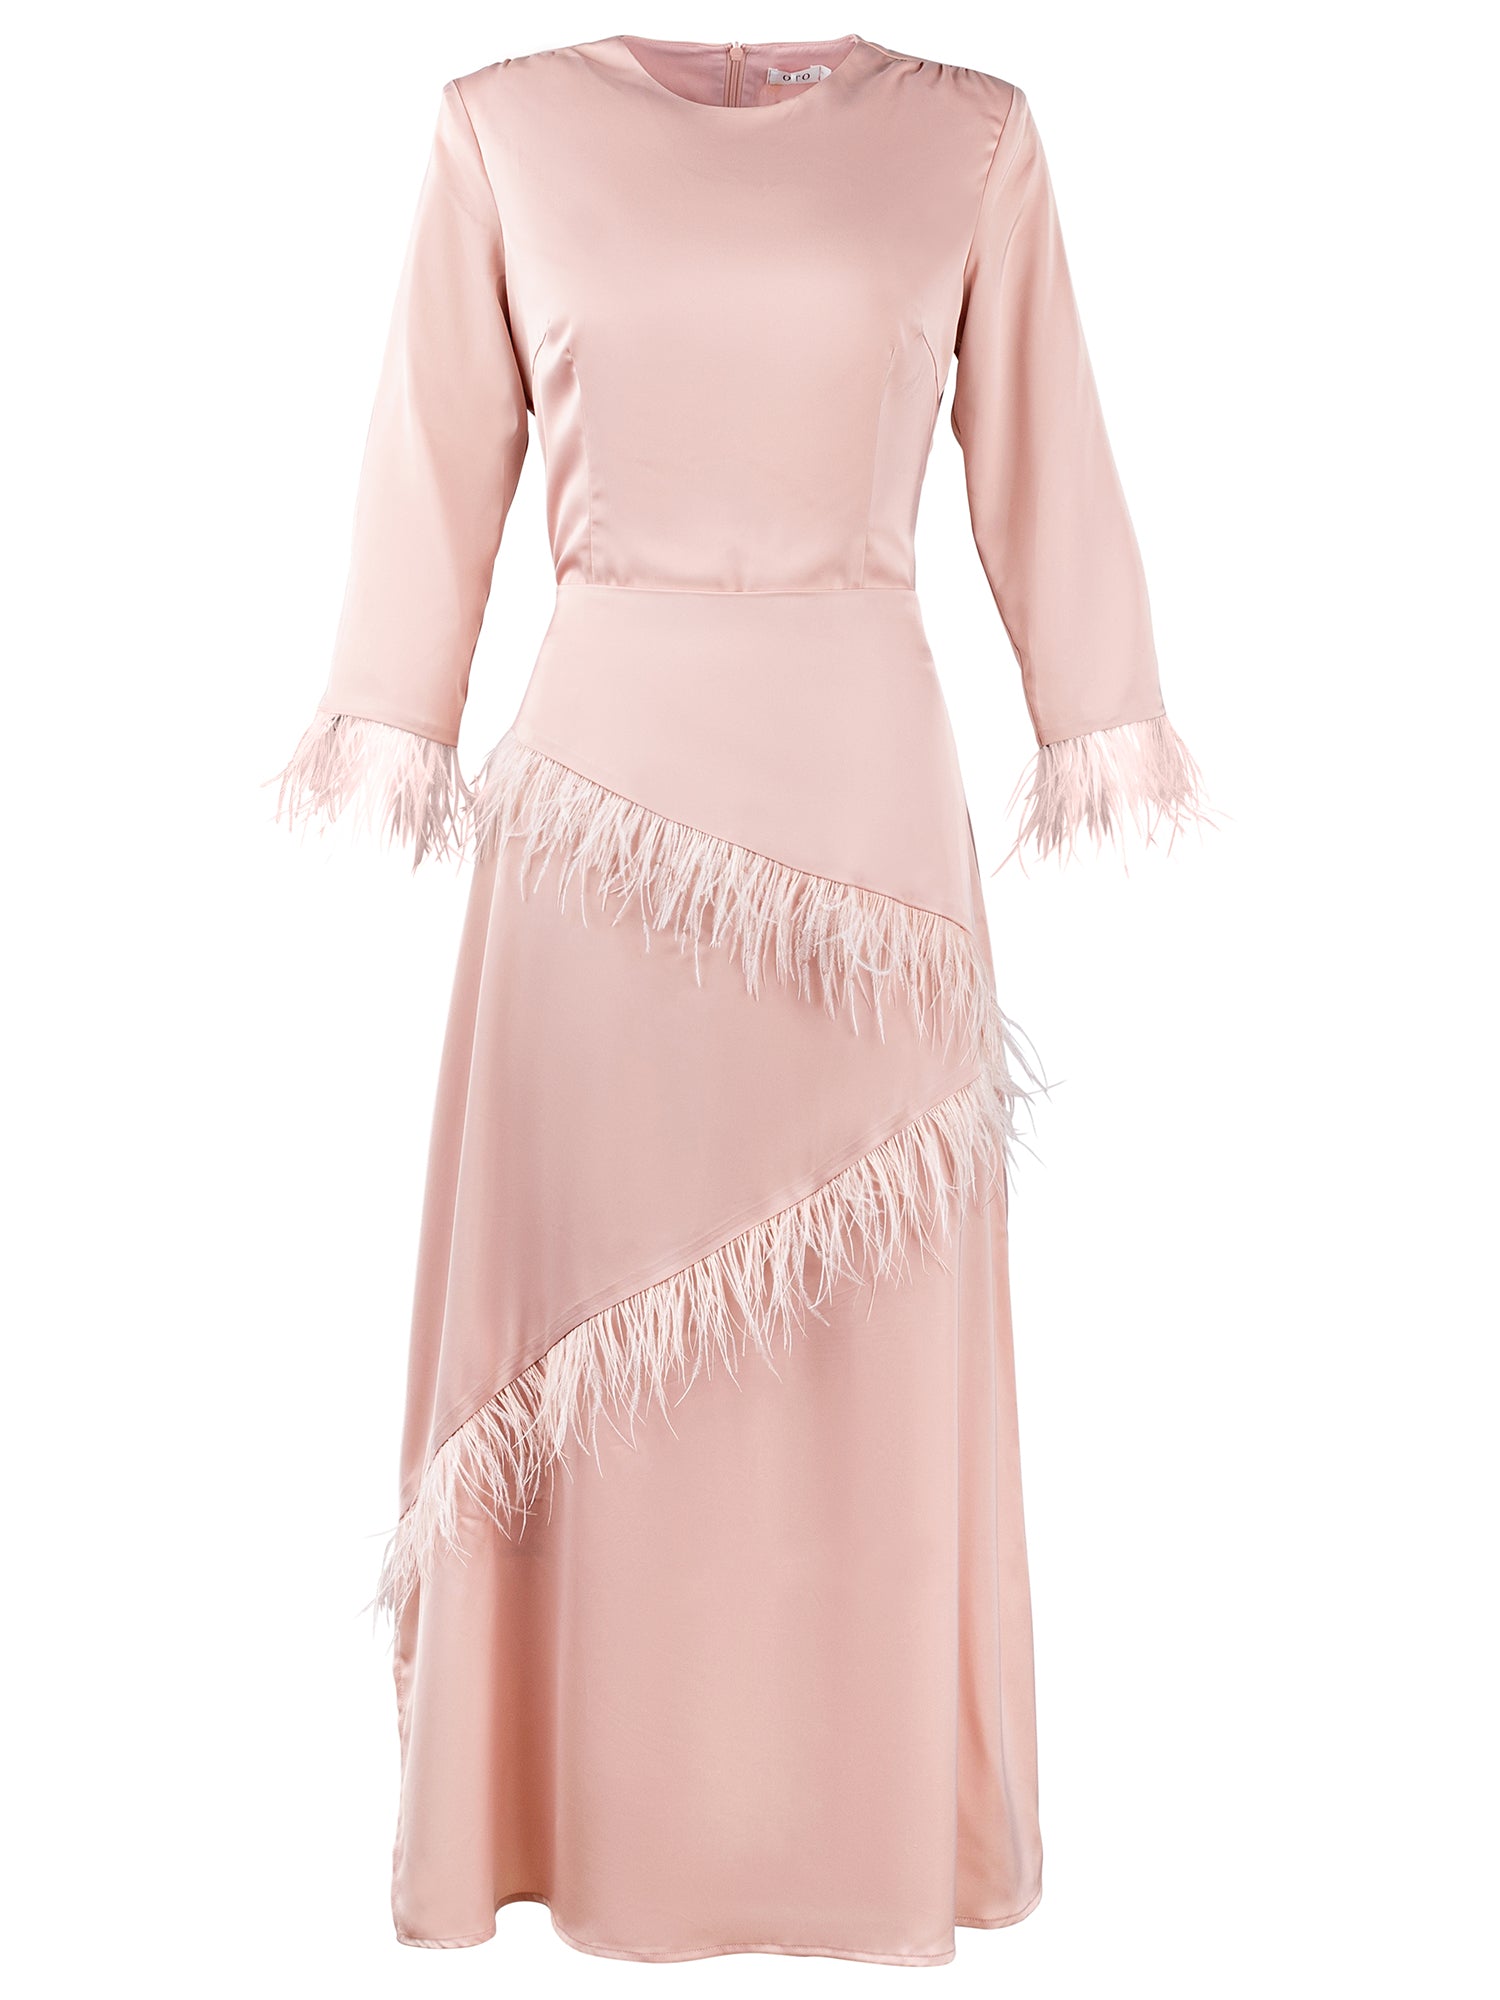 Esteem Couture Pink Feather Skirt - Skirts